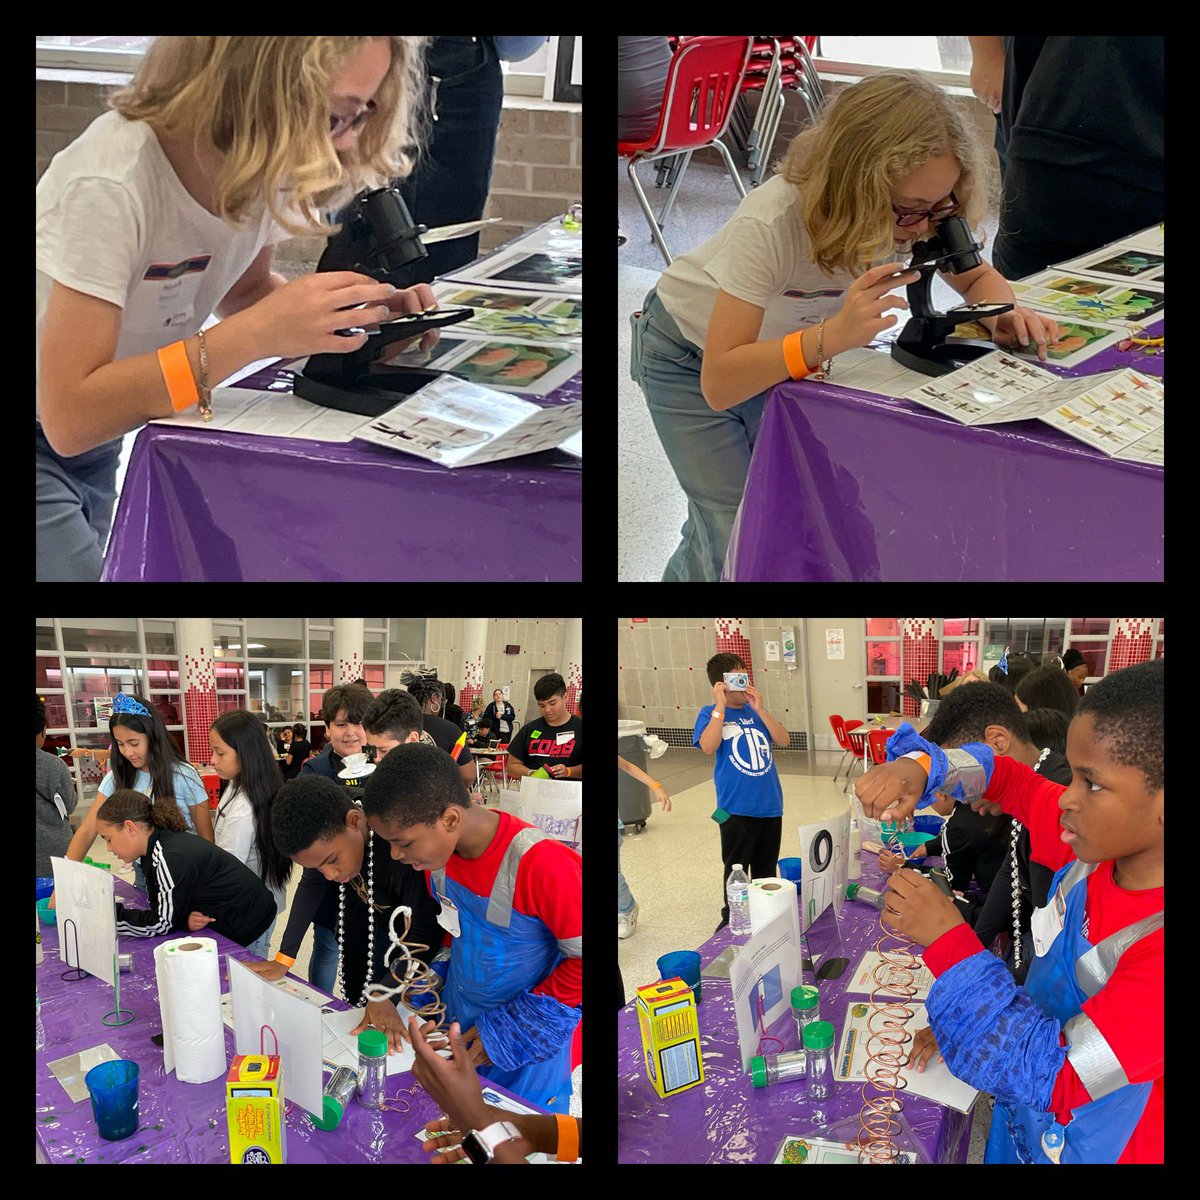 Break out time during #EcobotChallenge. Learning is more fun when it’s hands on! @HCDE_CASE @Henderson_CIA @AliefISD @TheExecEFFECT @MissPersnikety @AISDSupe @cohmoedu @Kennedy_CIA @Mahanay_CIA @Miller_CIA